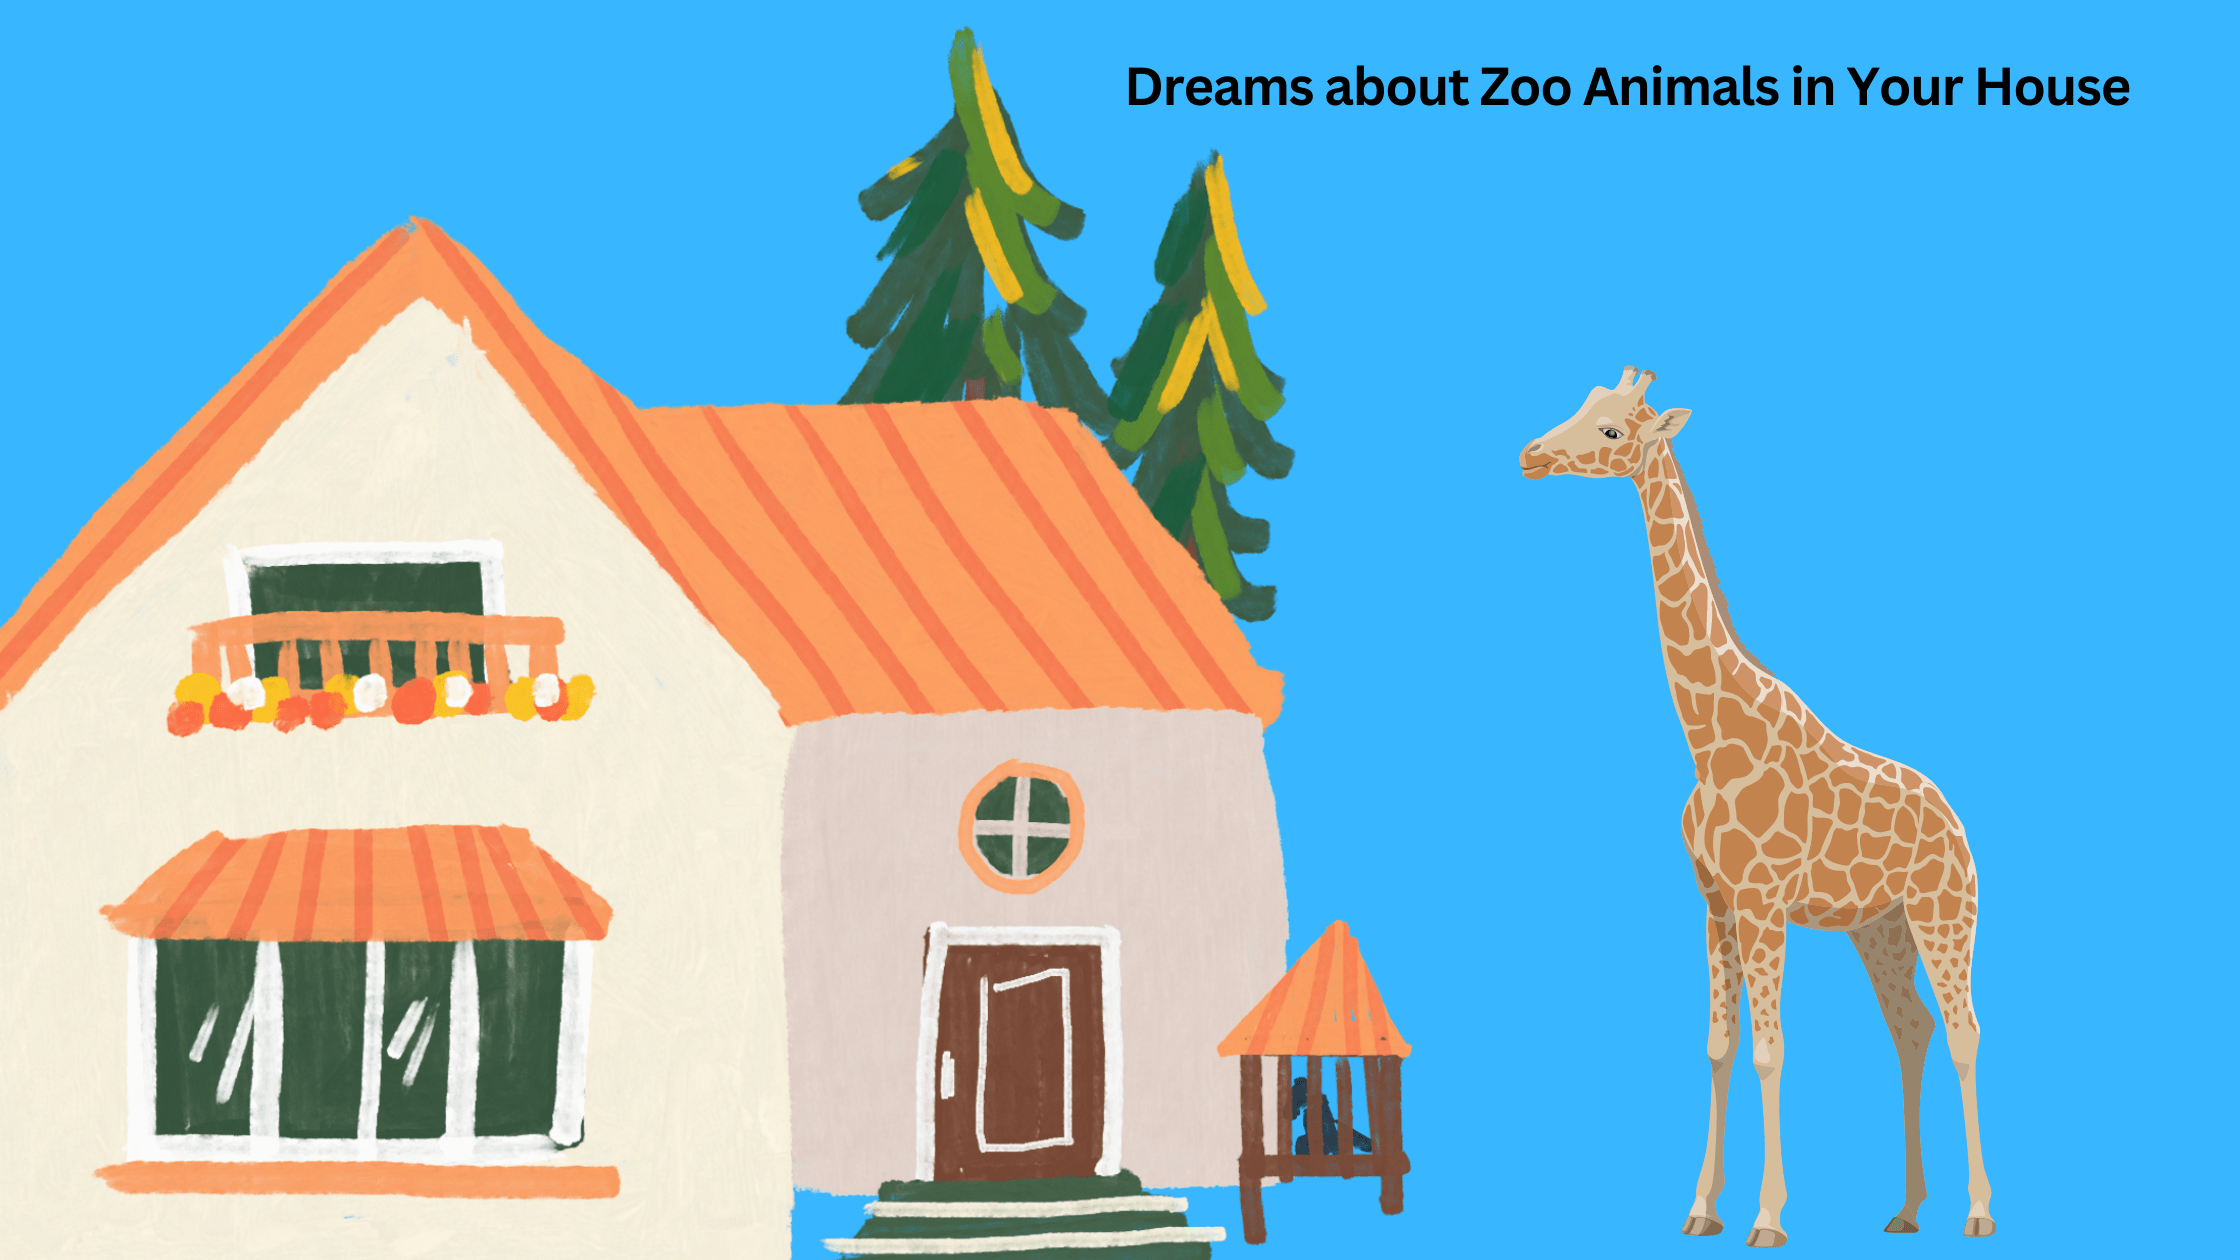 Dreams about Zoo Animals in Your House (1)